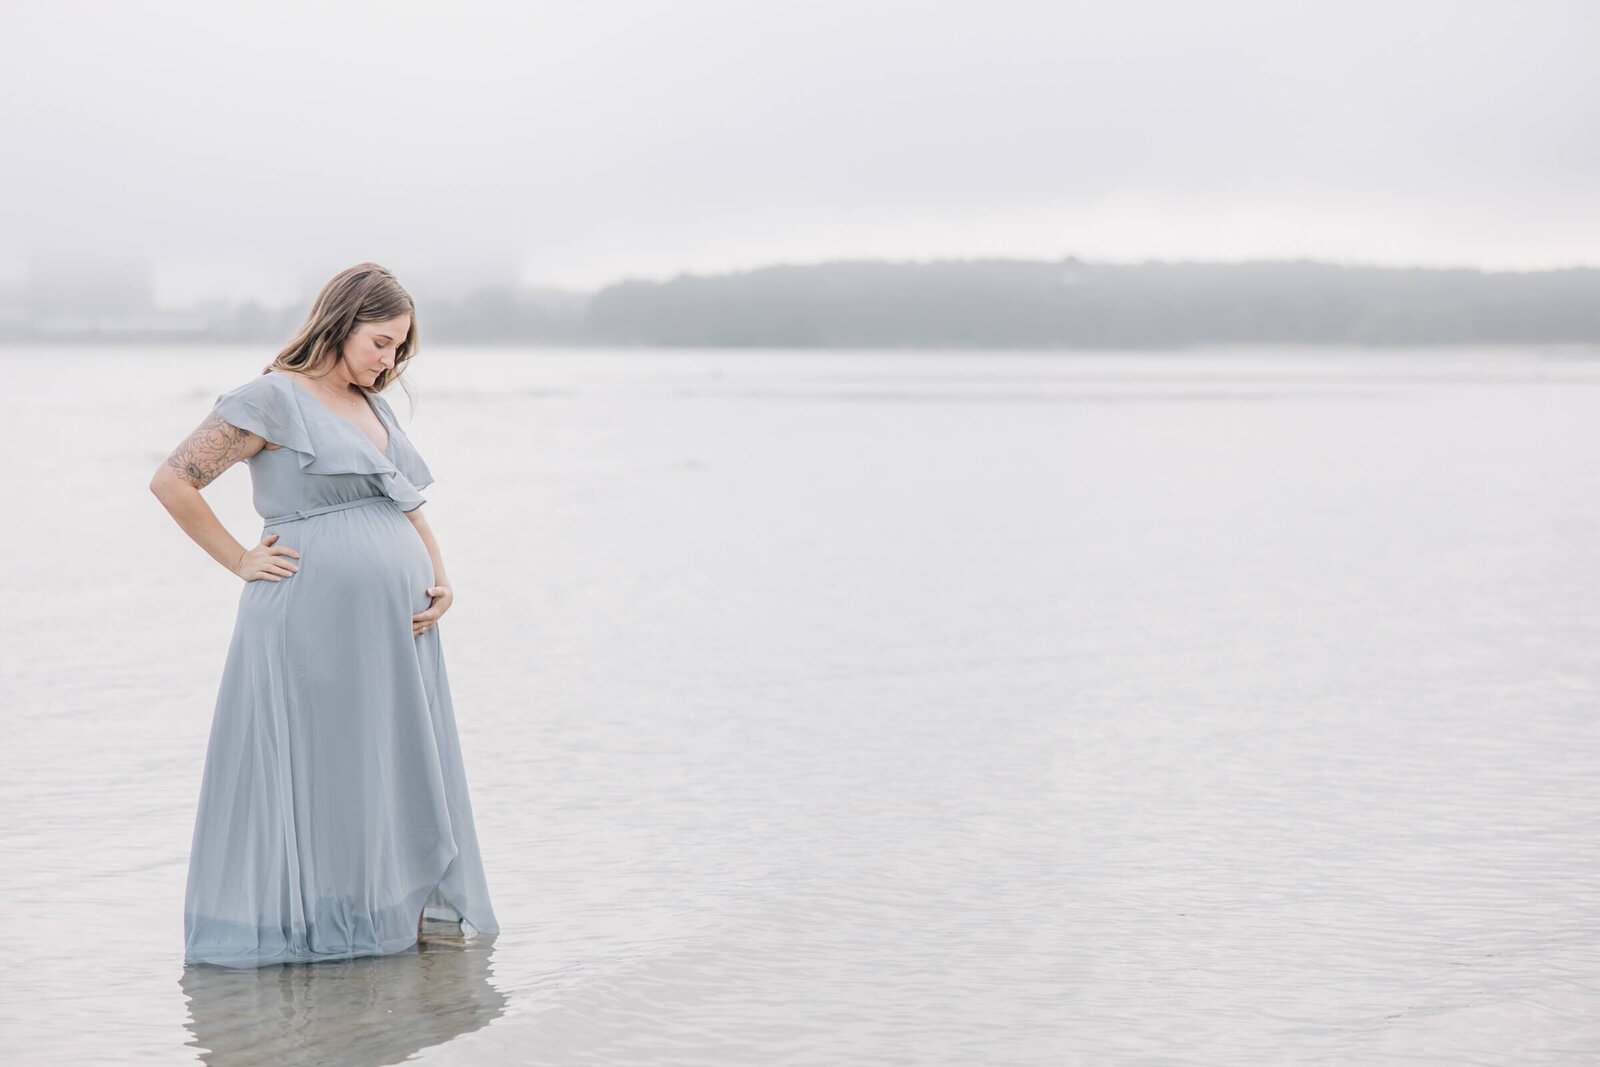 Pregnant woman in shallow water in light blue dress